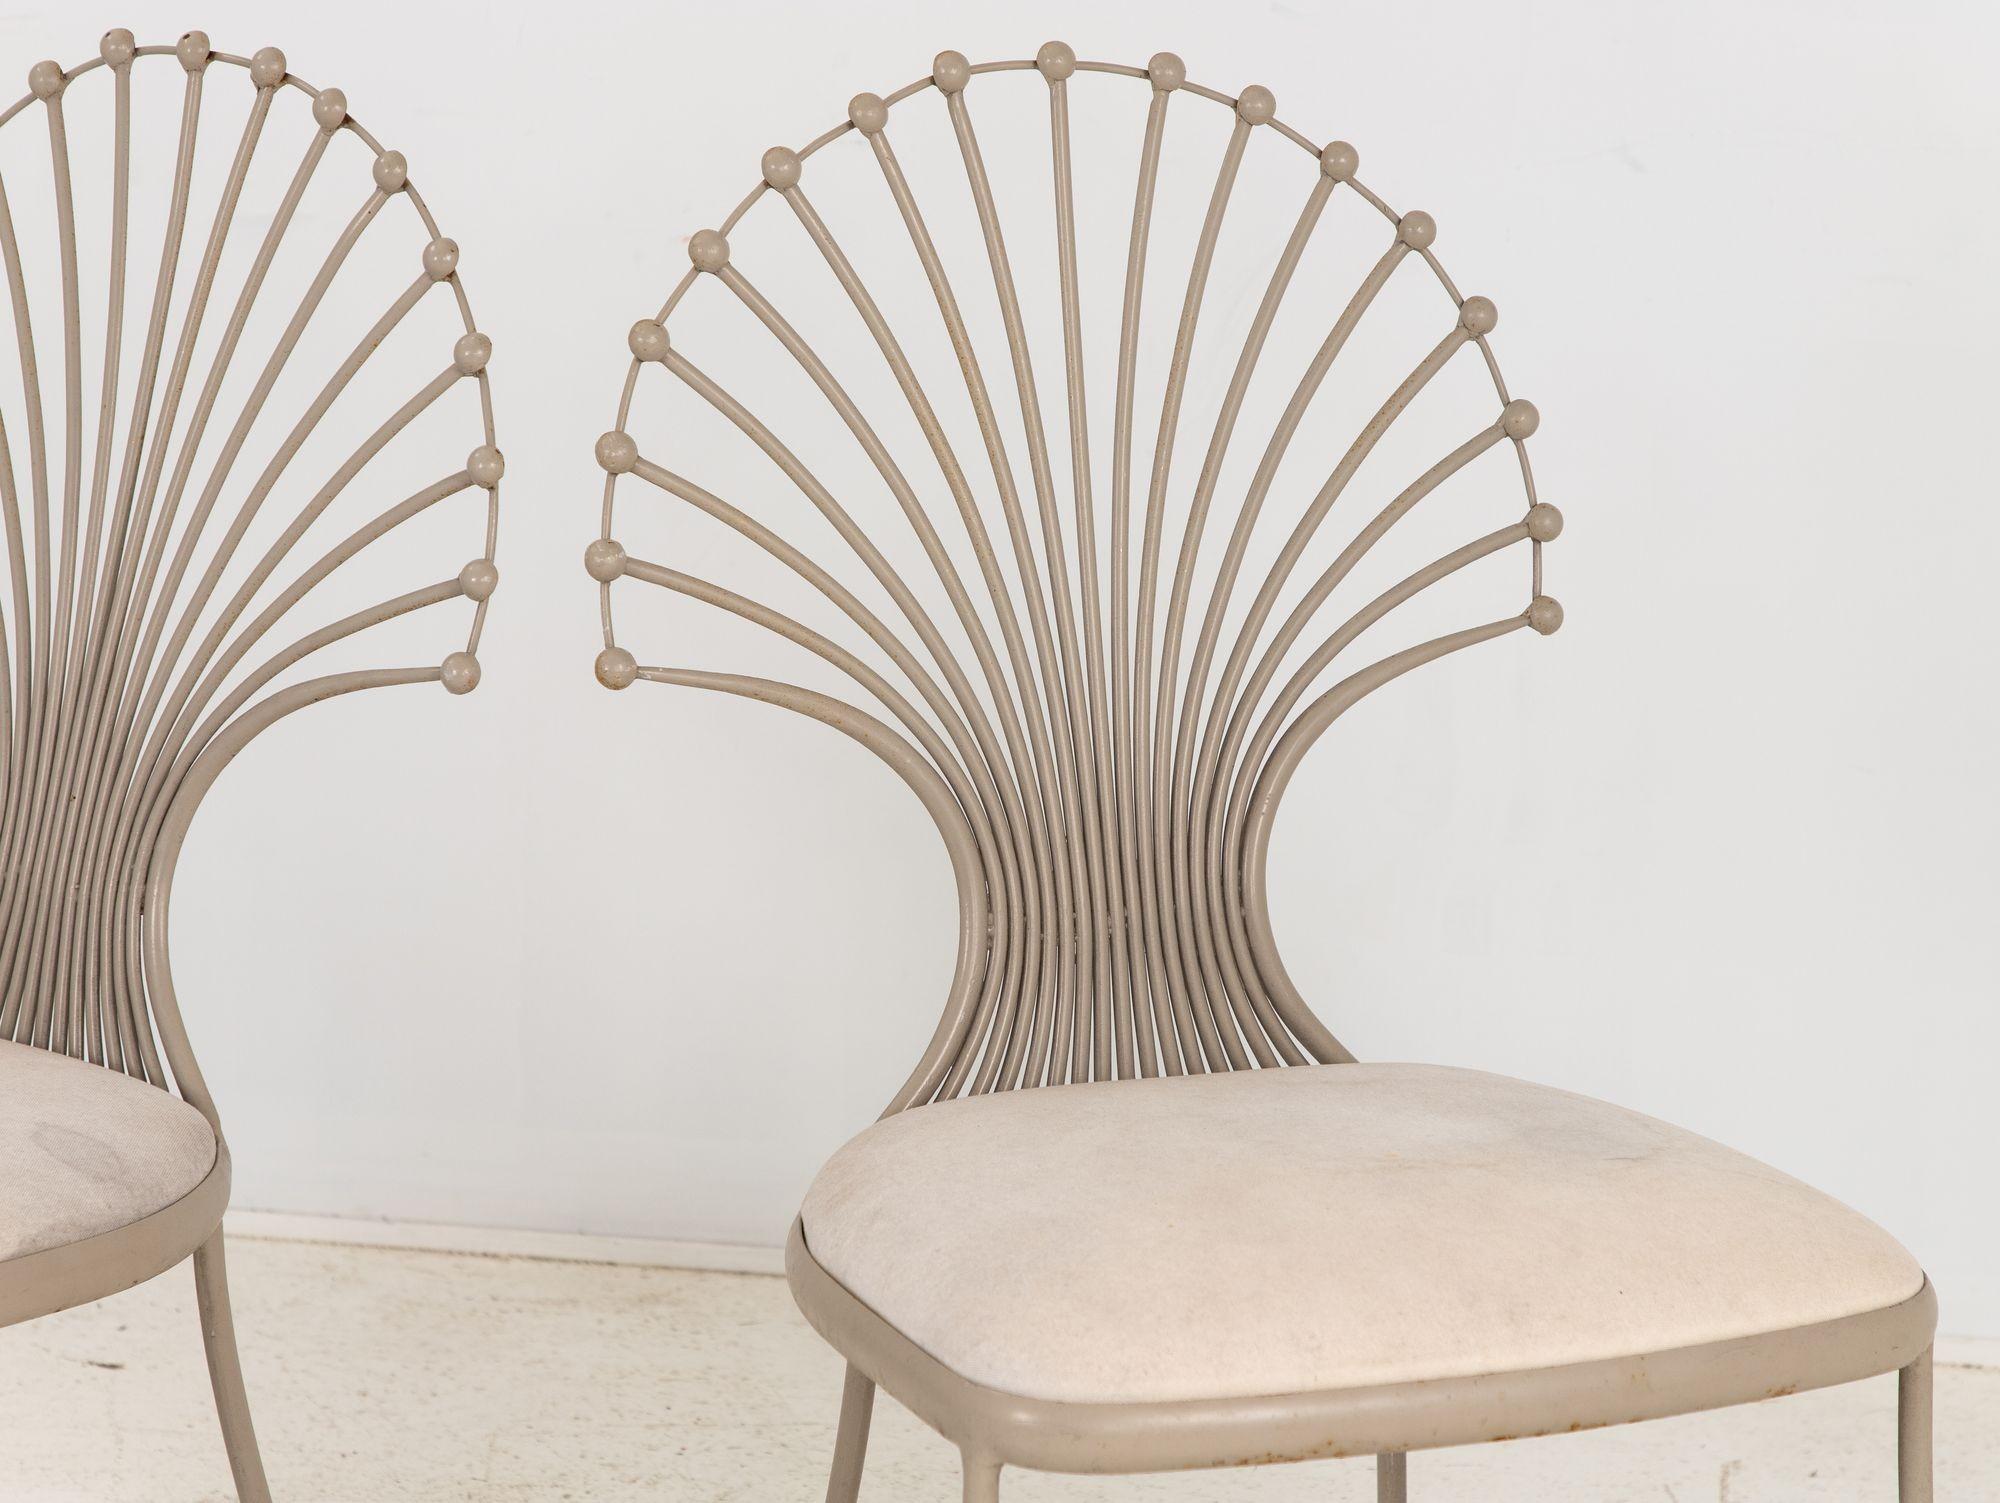 Late 20th Century Pair Side Chairs with Peacock or Wheat Sheaf Motif, Gray Painted Aluminum For Sale